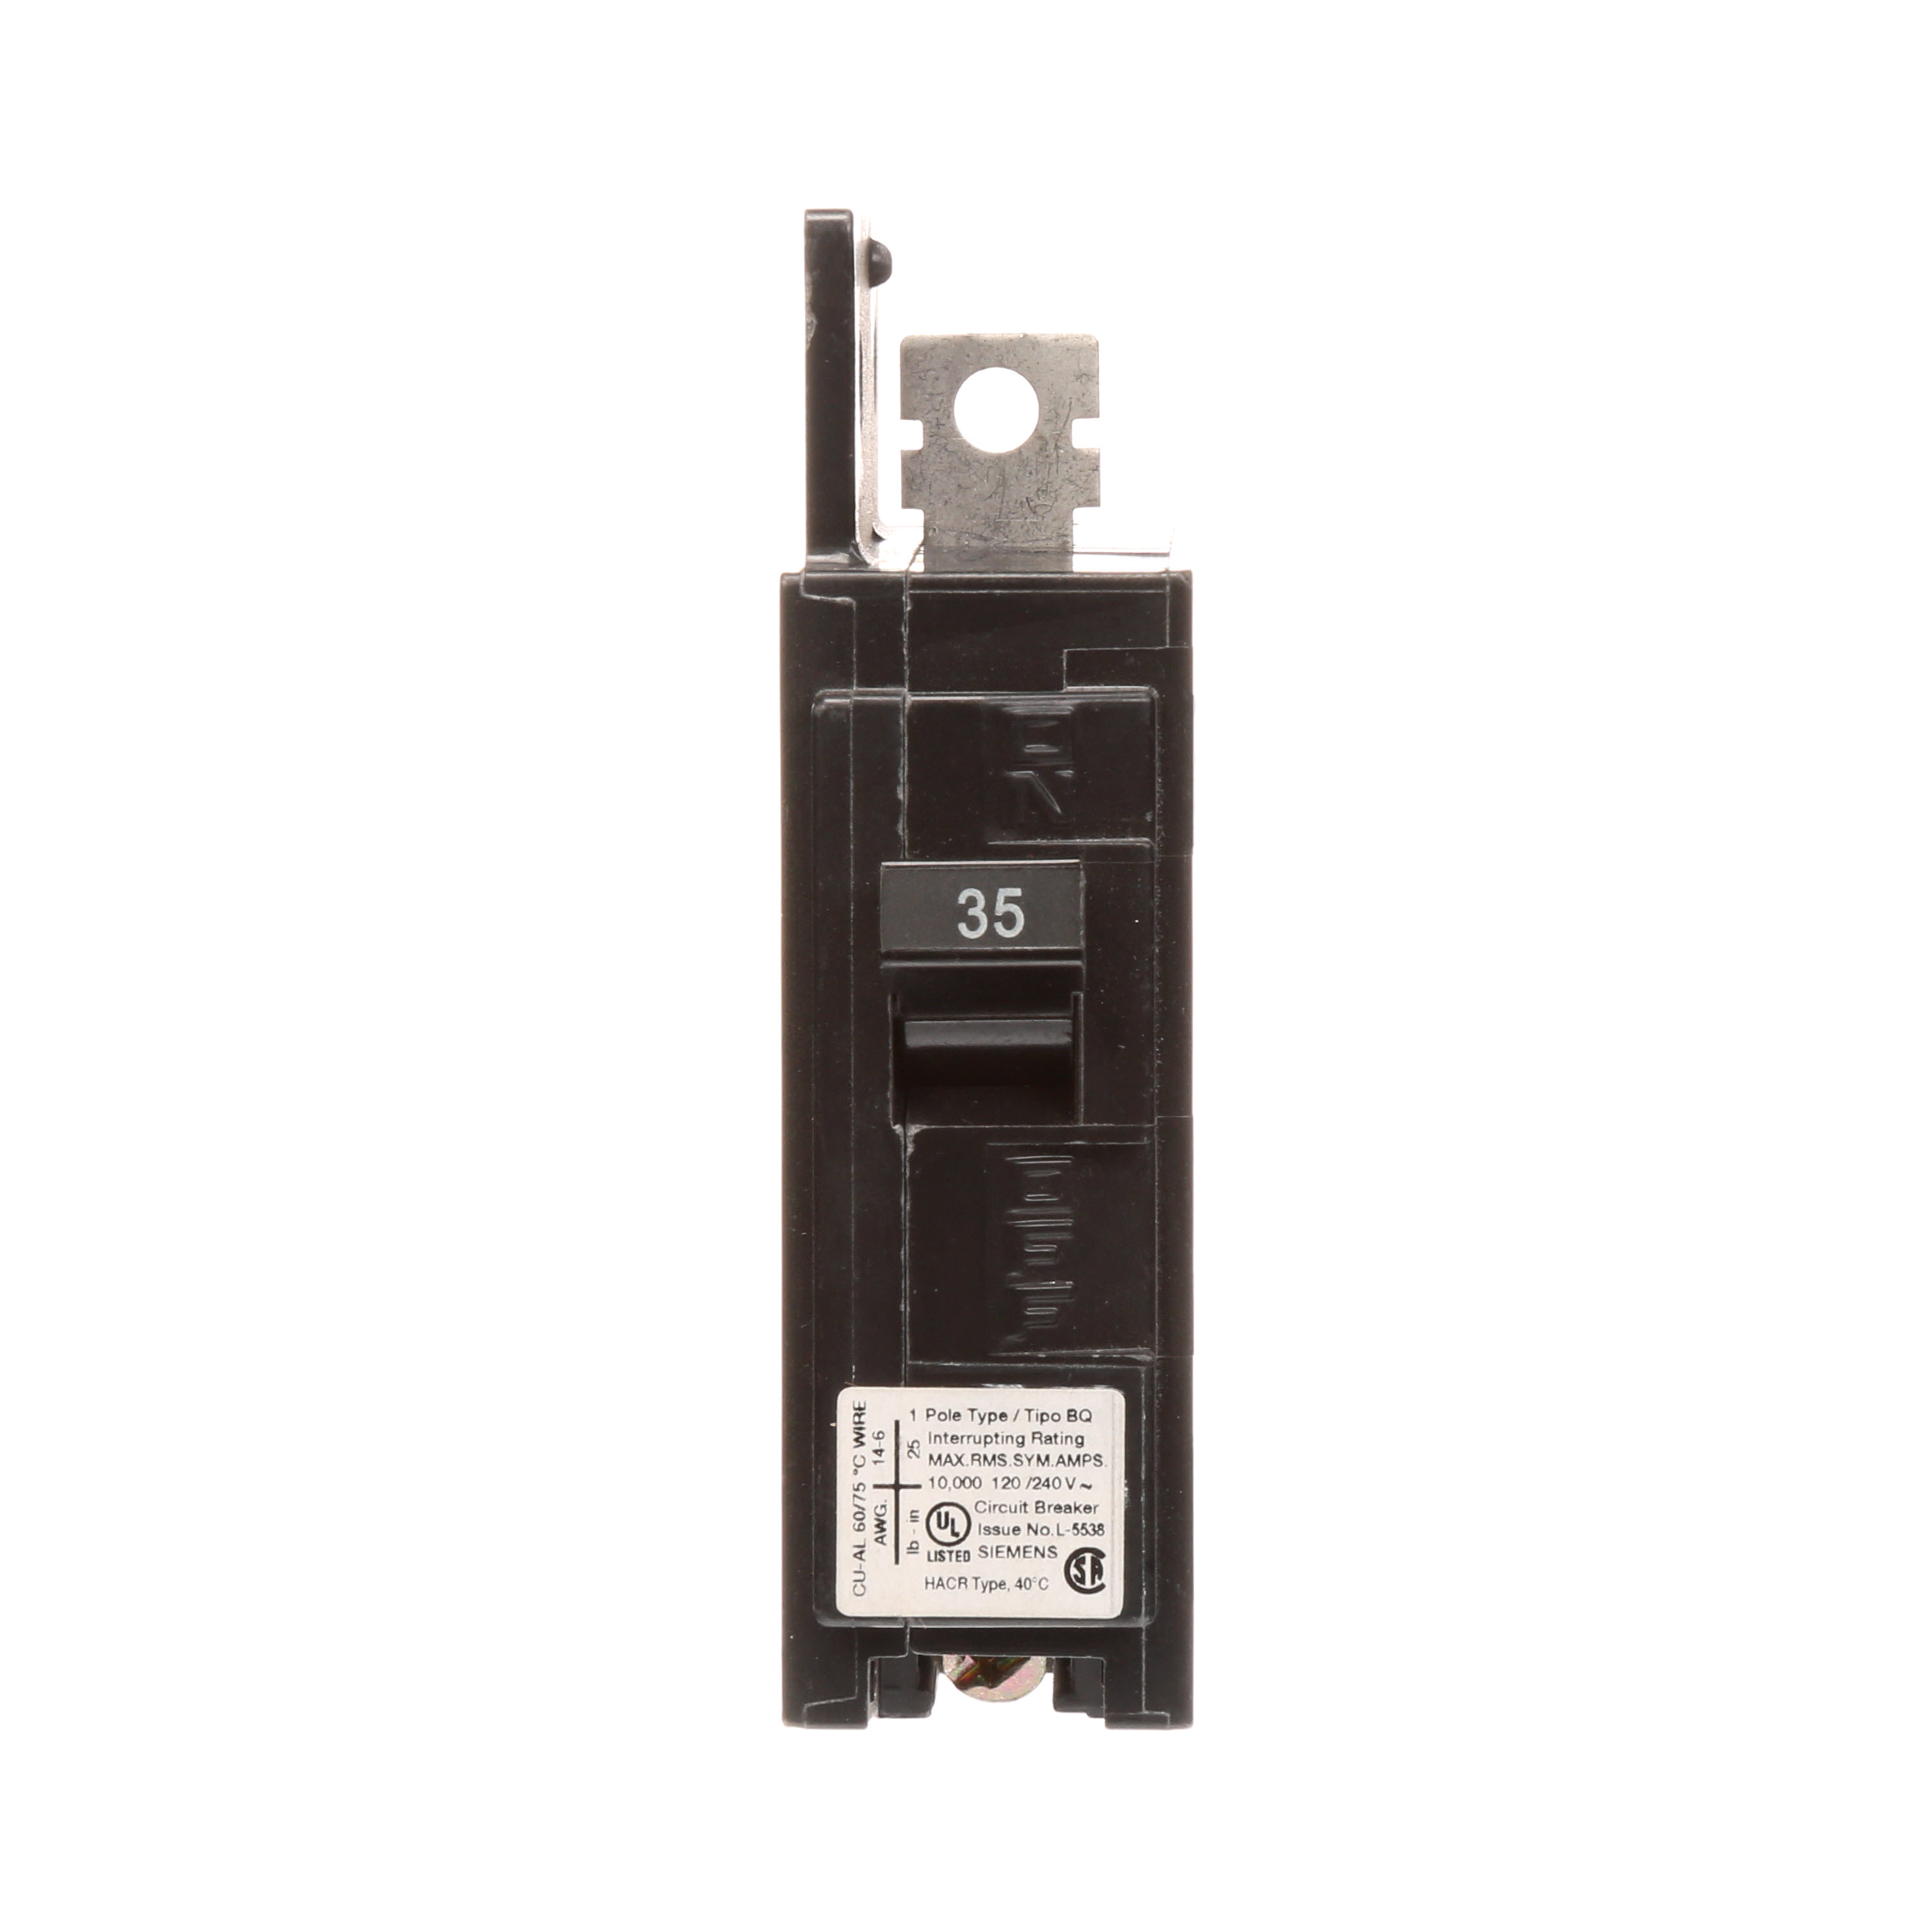 Siemens Low Voltage Molded Case Circuit Breakers General Purpose MCCBs are Circuit Protection Molded Case Circuit Breakers. 1-Pole circuit breaker type BQ. Rated 120V (035A) (AIR 10 kA). Special features Load side lugs are included.